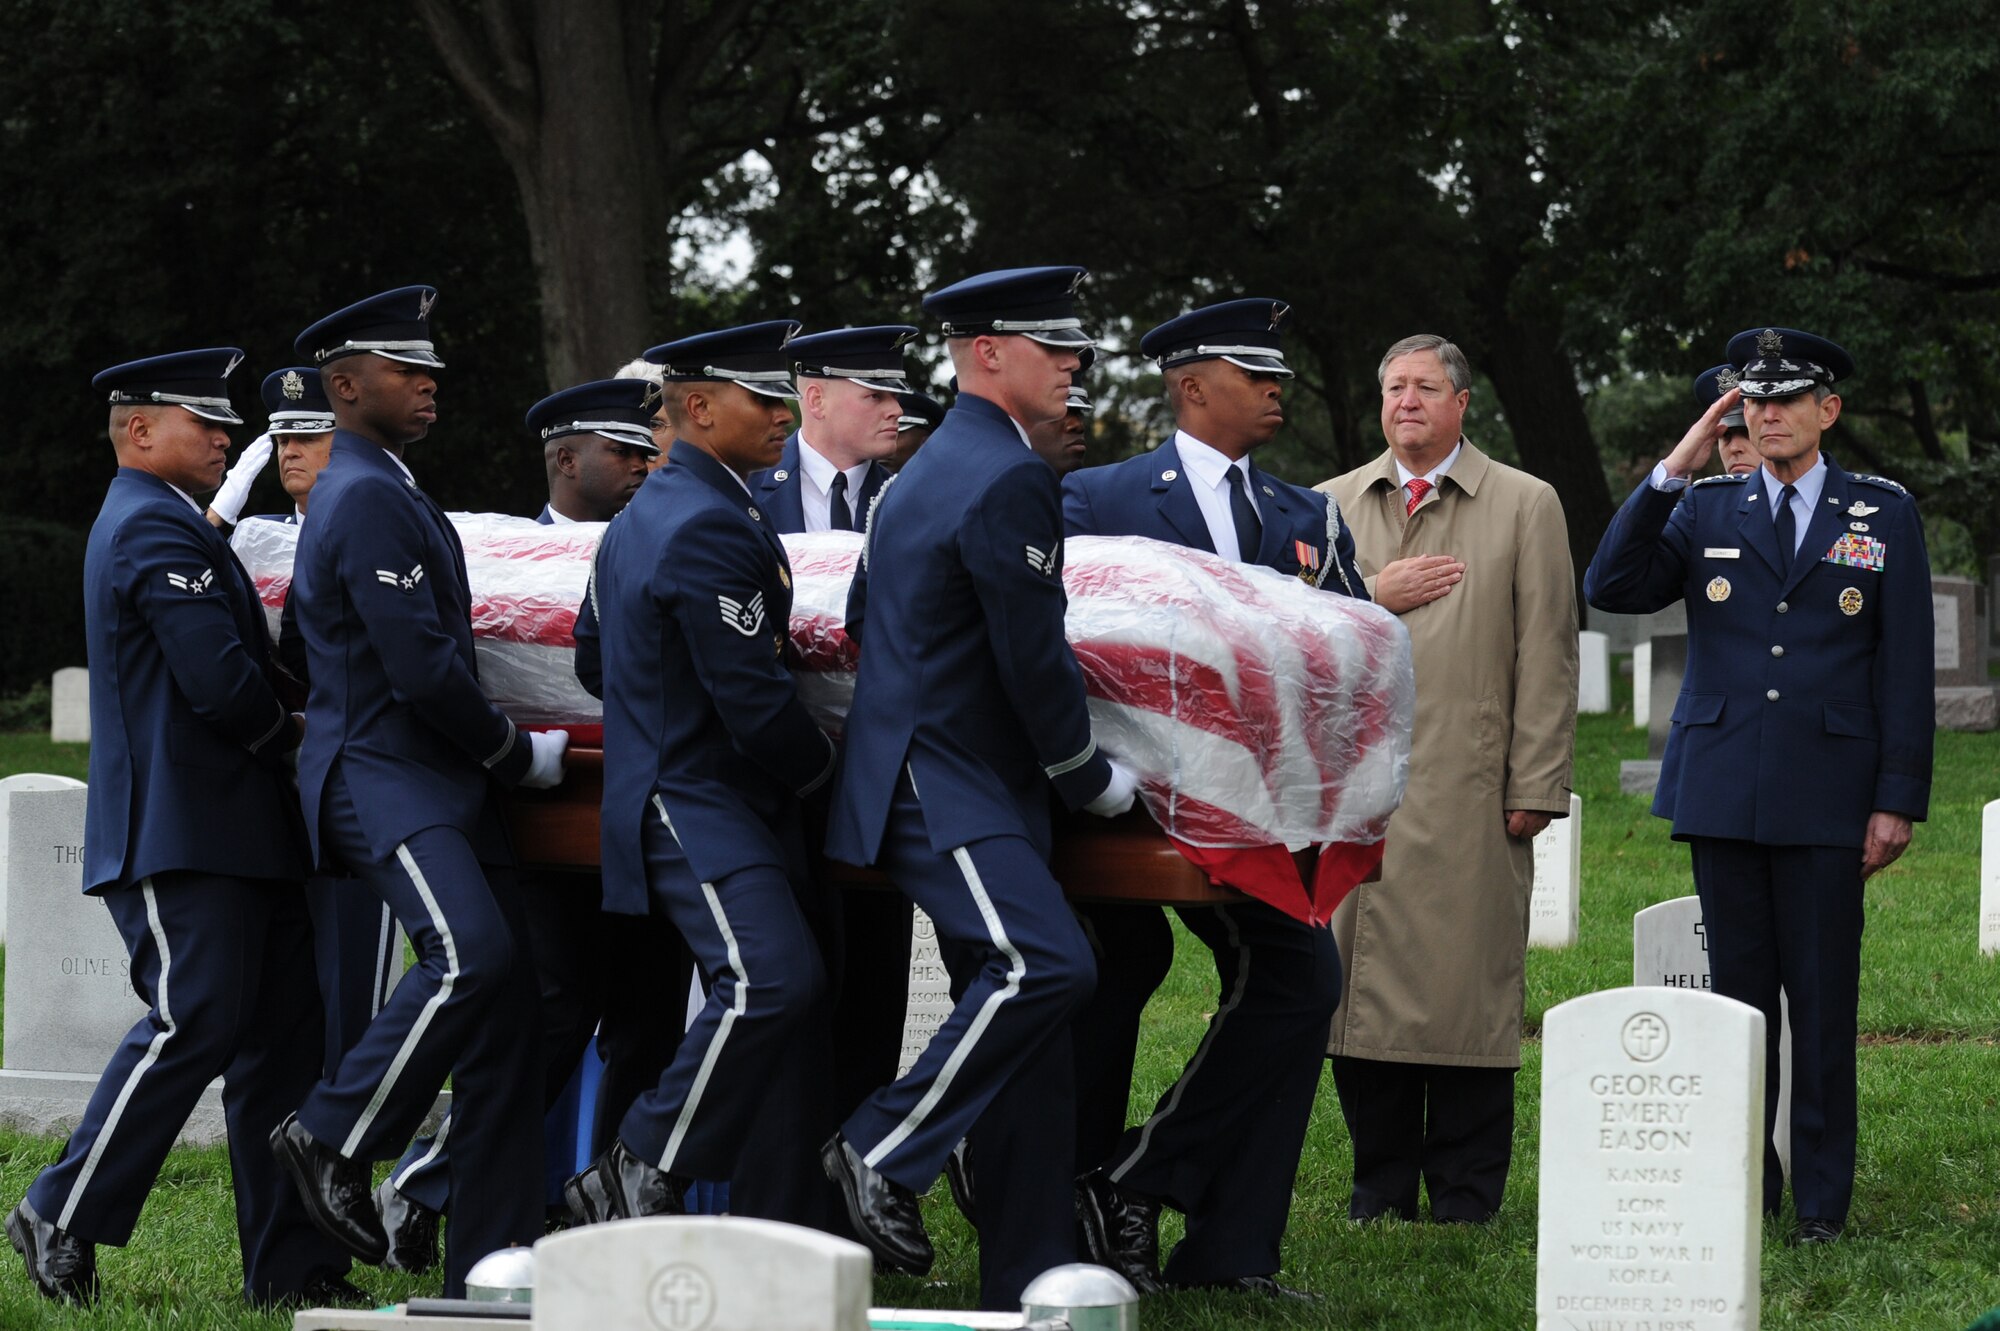 U.S. Air Force Honor Guard members carry retired Maj. Gen. John Alison to his final resting place as Secretary of the Air Force Michael Donley and Air Force Chief of Staff Gen. Norton Schwartz look on Oct. 3, 2011, at Arlington National Cemetery, Va. Donley and Schwartz were present at the full-honors funeral to pay their respects to Alison, a World War II and Korean War hero, and his family. (U.S. Air Force photo/Staff Sgt. Christopher Ruano)